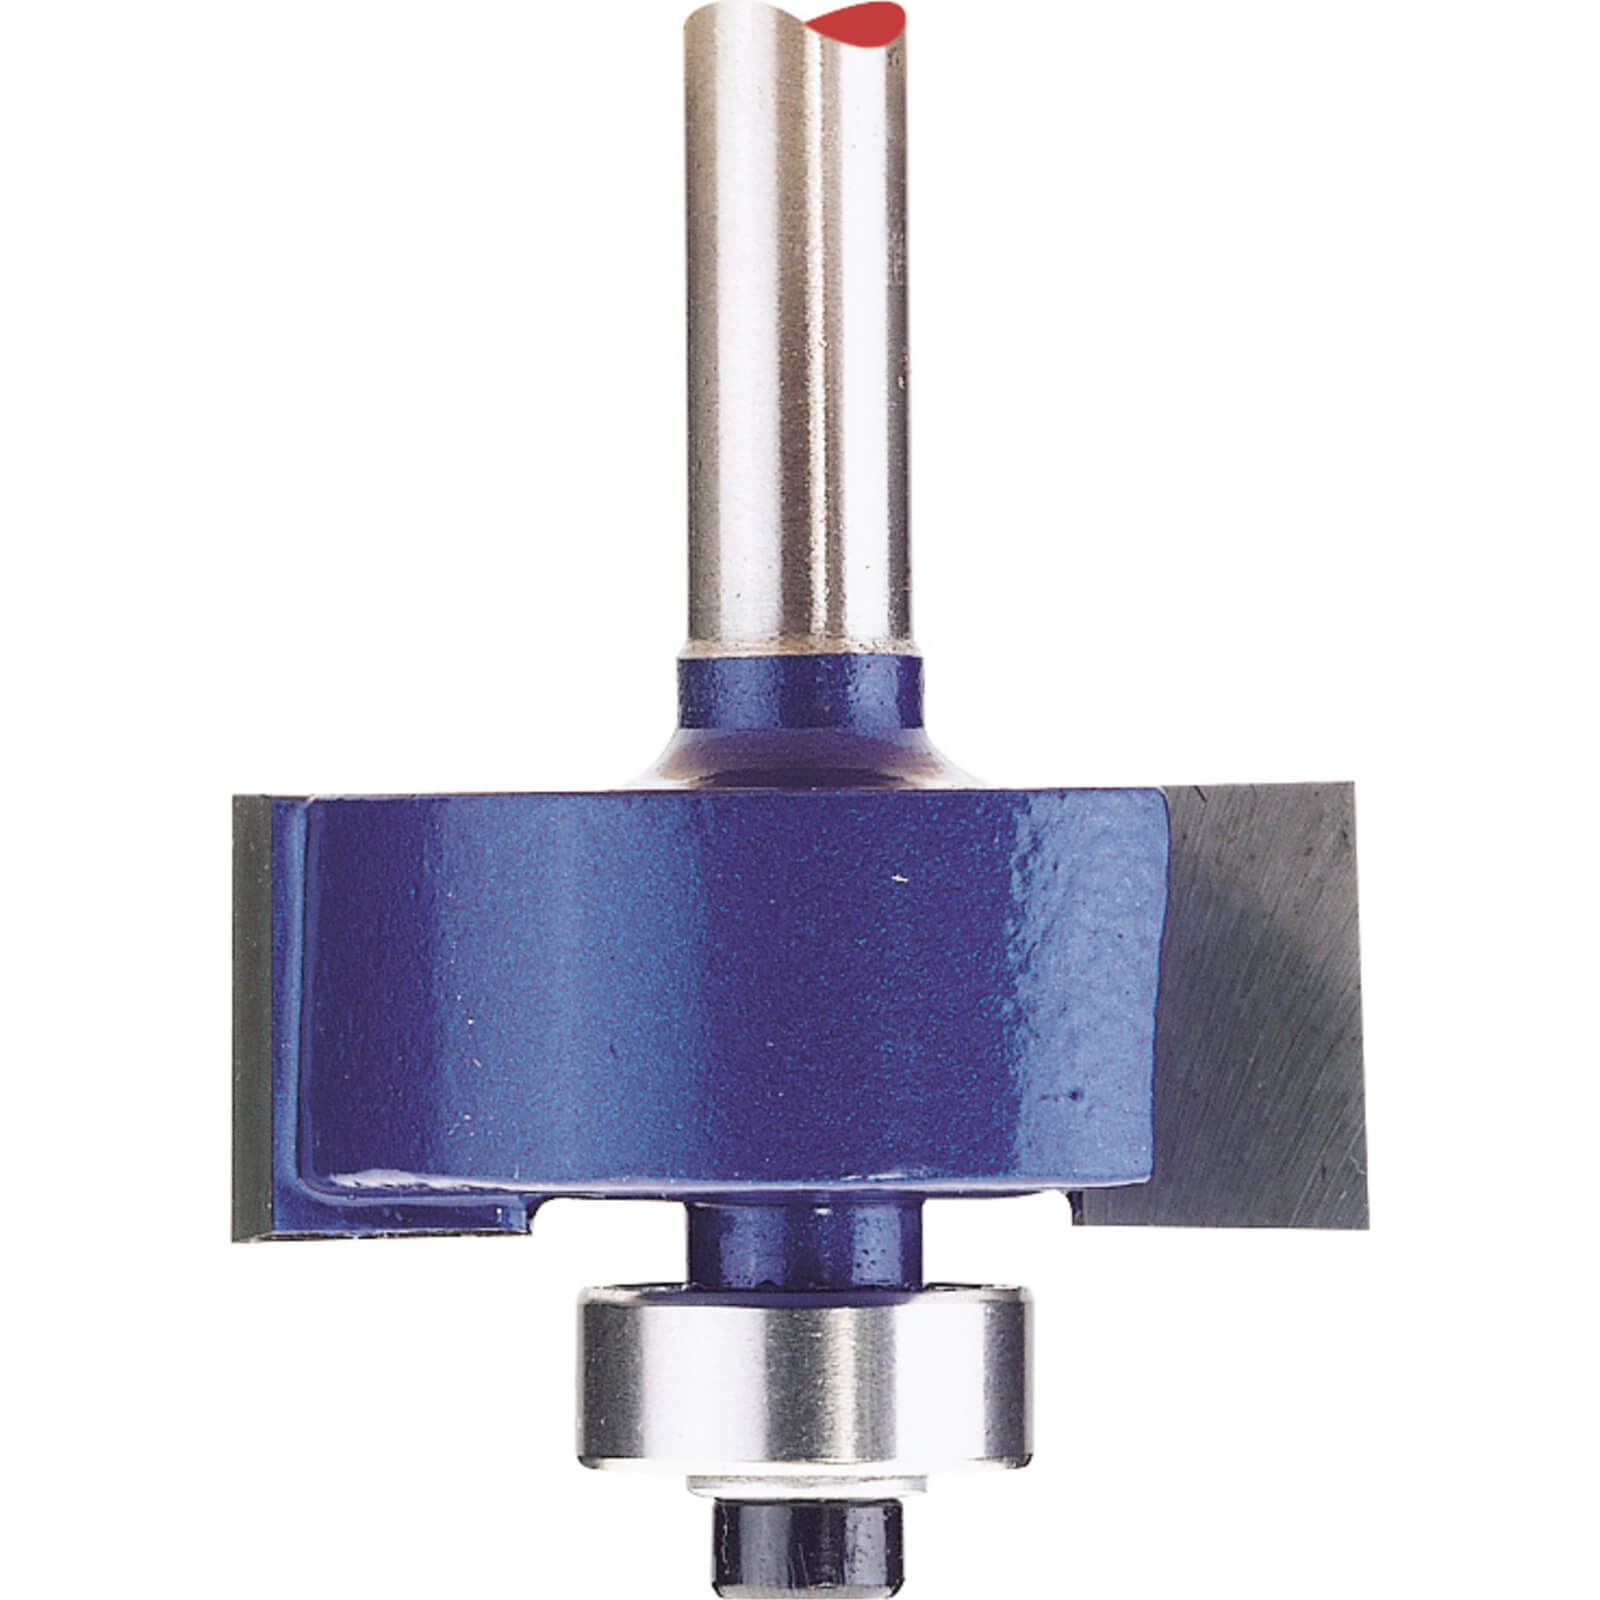 Image of Draper Bearing Guided Rebate Router Cutter 32mm 12mm 1/4"